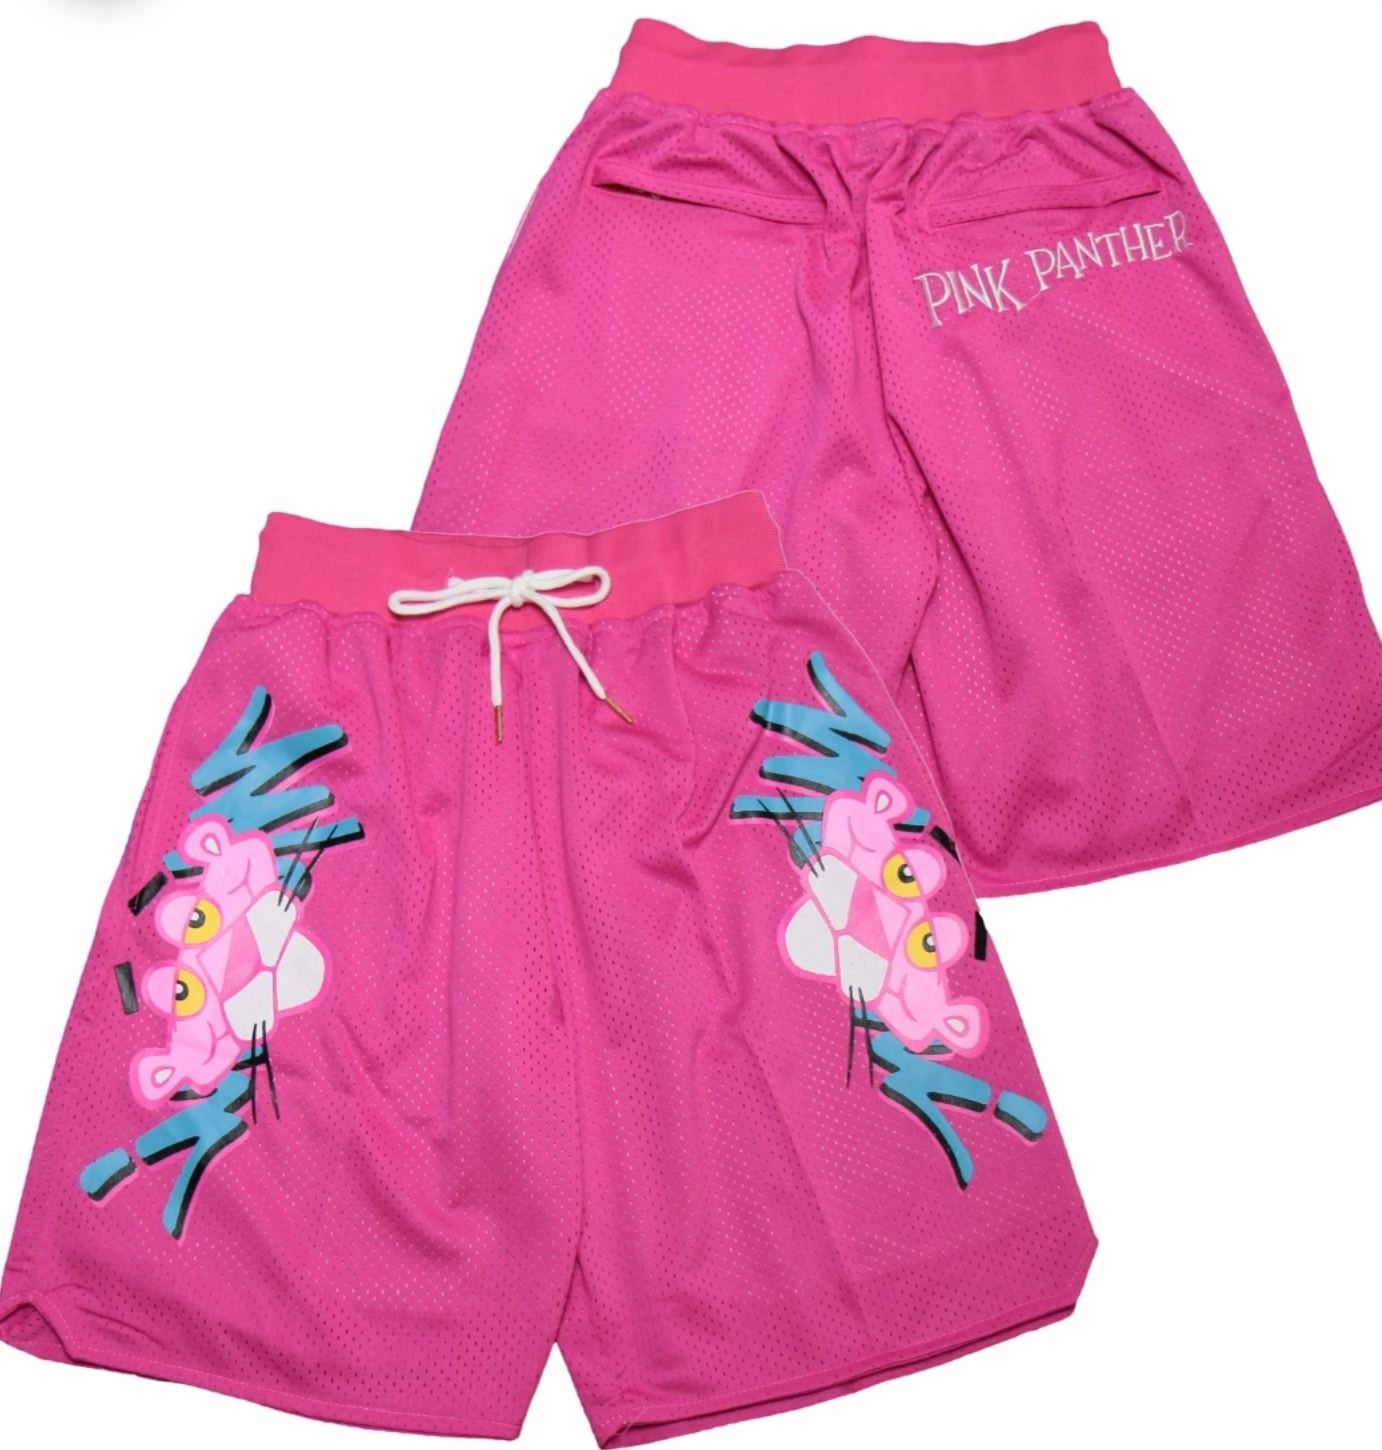 Miami Casual Shorts Pink Panther Embroidery Stitched Zip Pockets